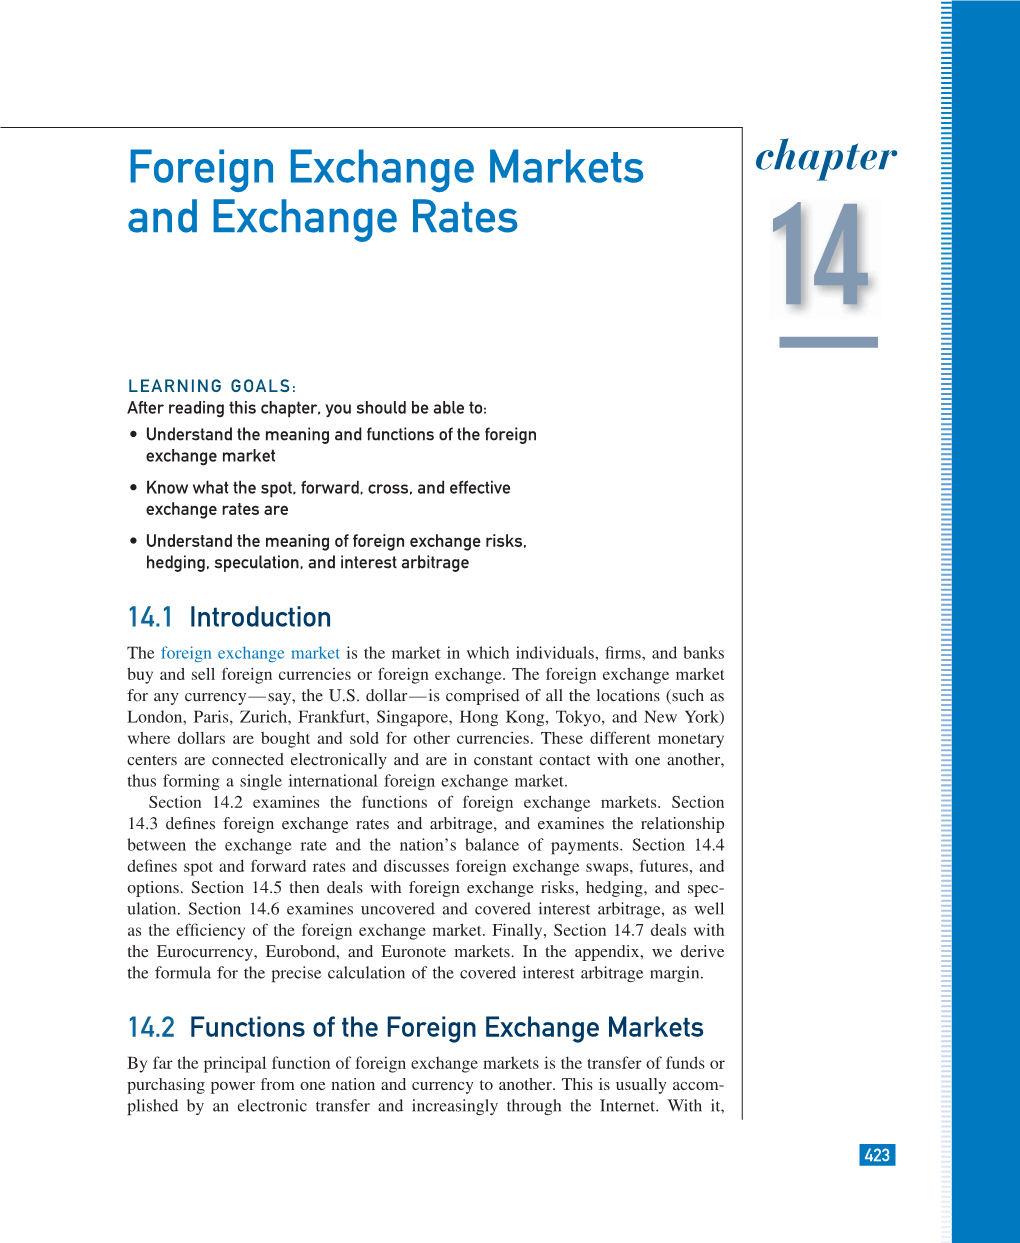 Foreign Exchange Markets and Exchange Rates